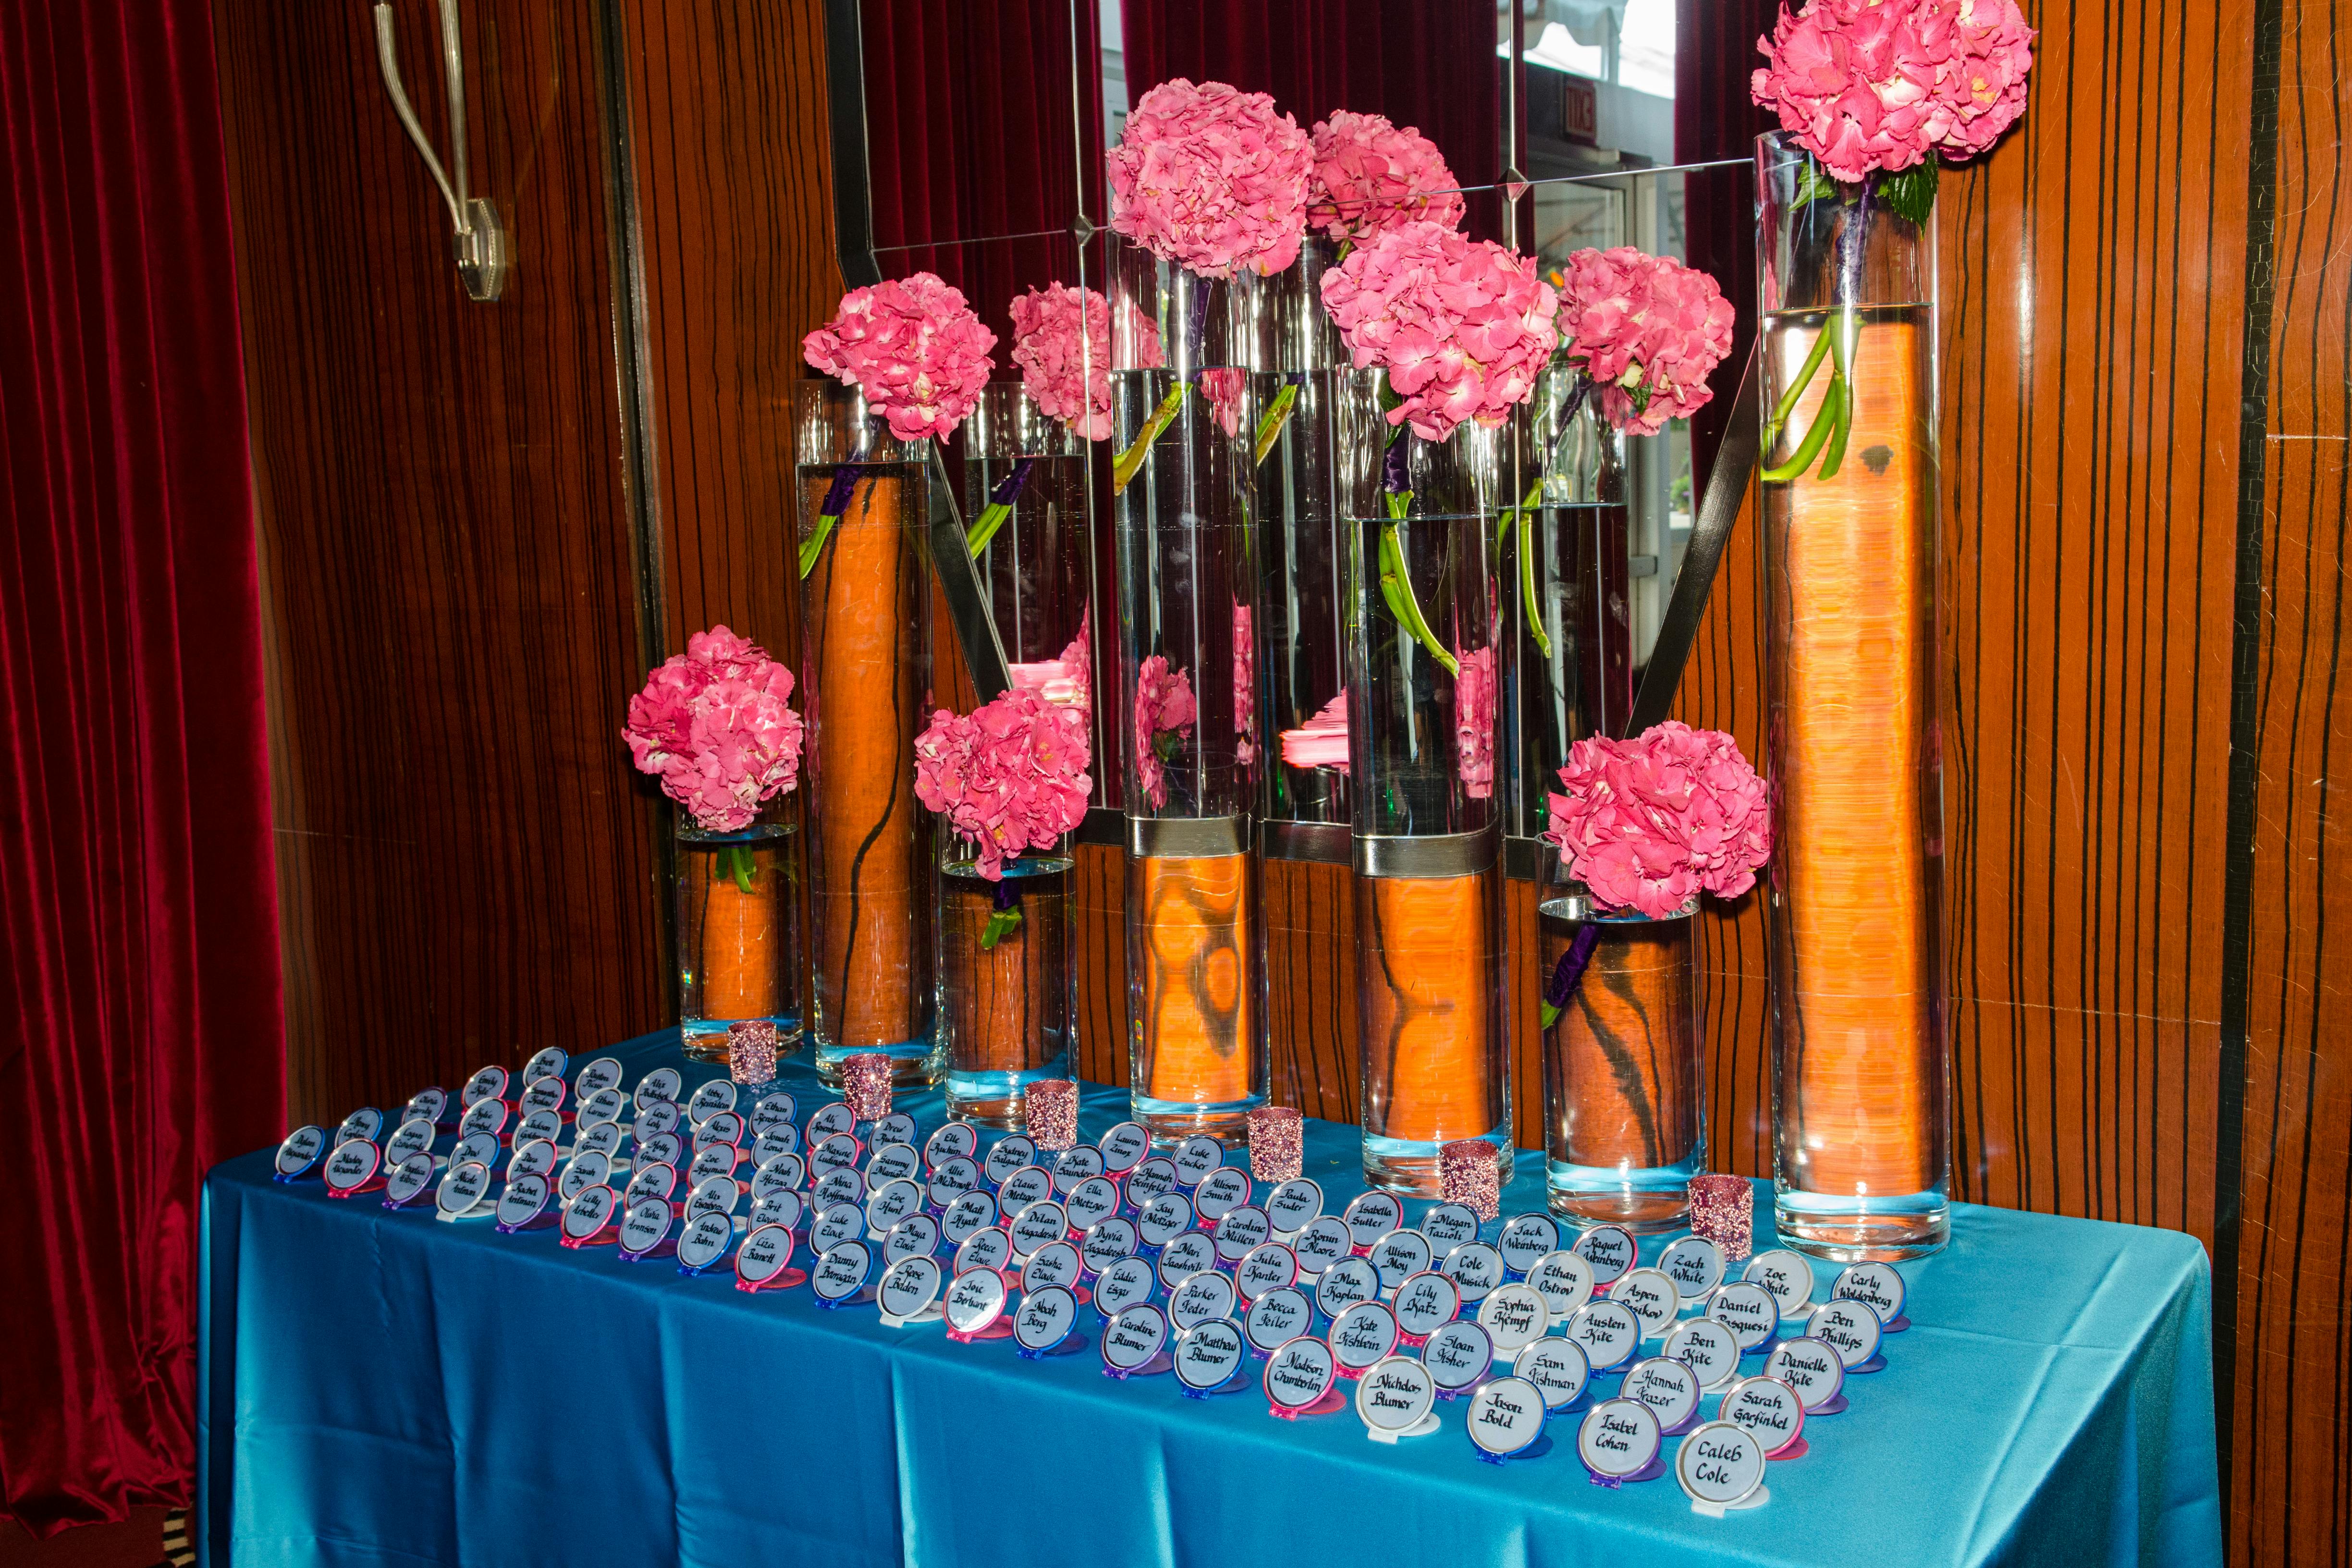 BE Dazzled Bat Mitzvah at Gibsons Bar & Steakhouse, Chicago in Chicago, IL | PartySlate